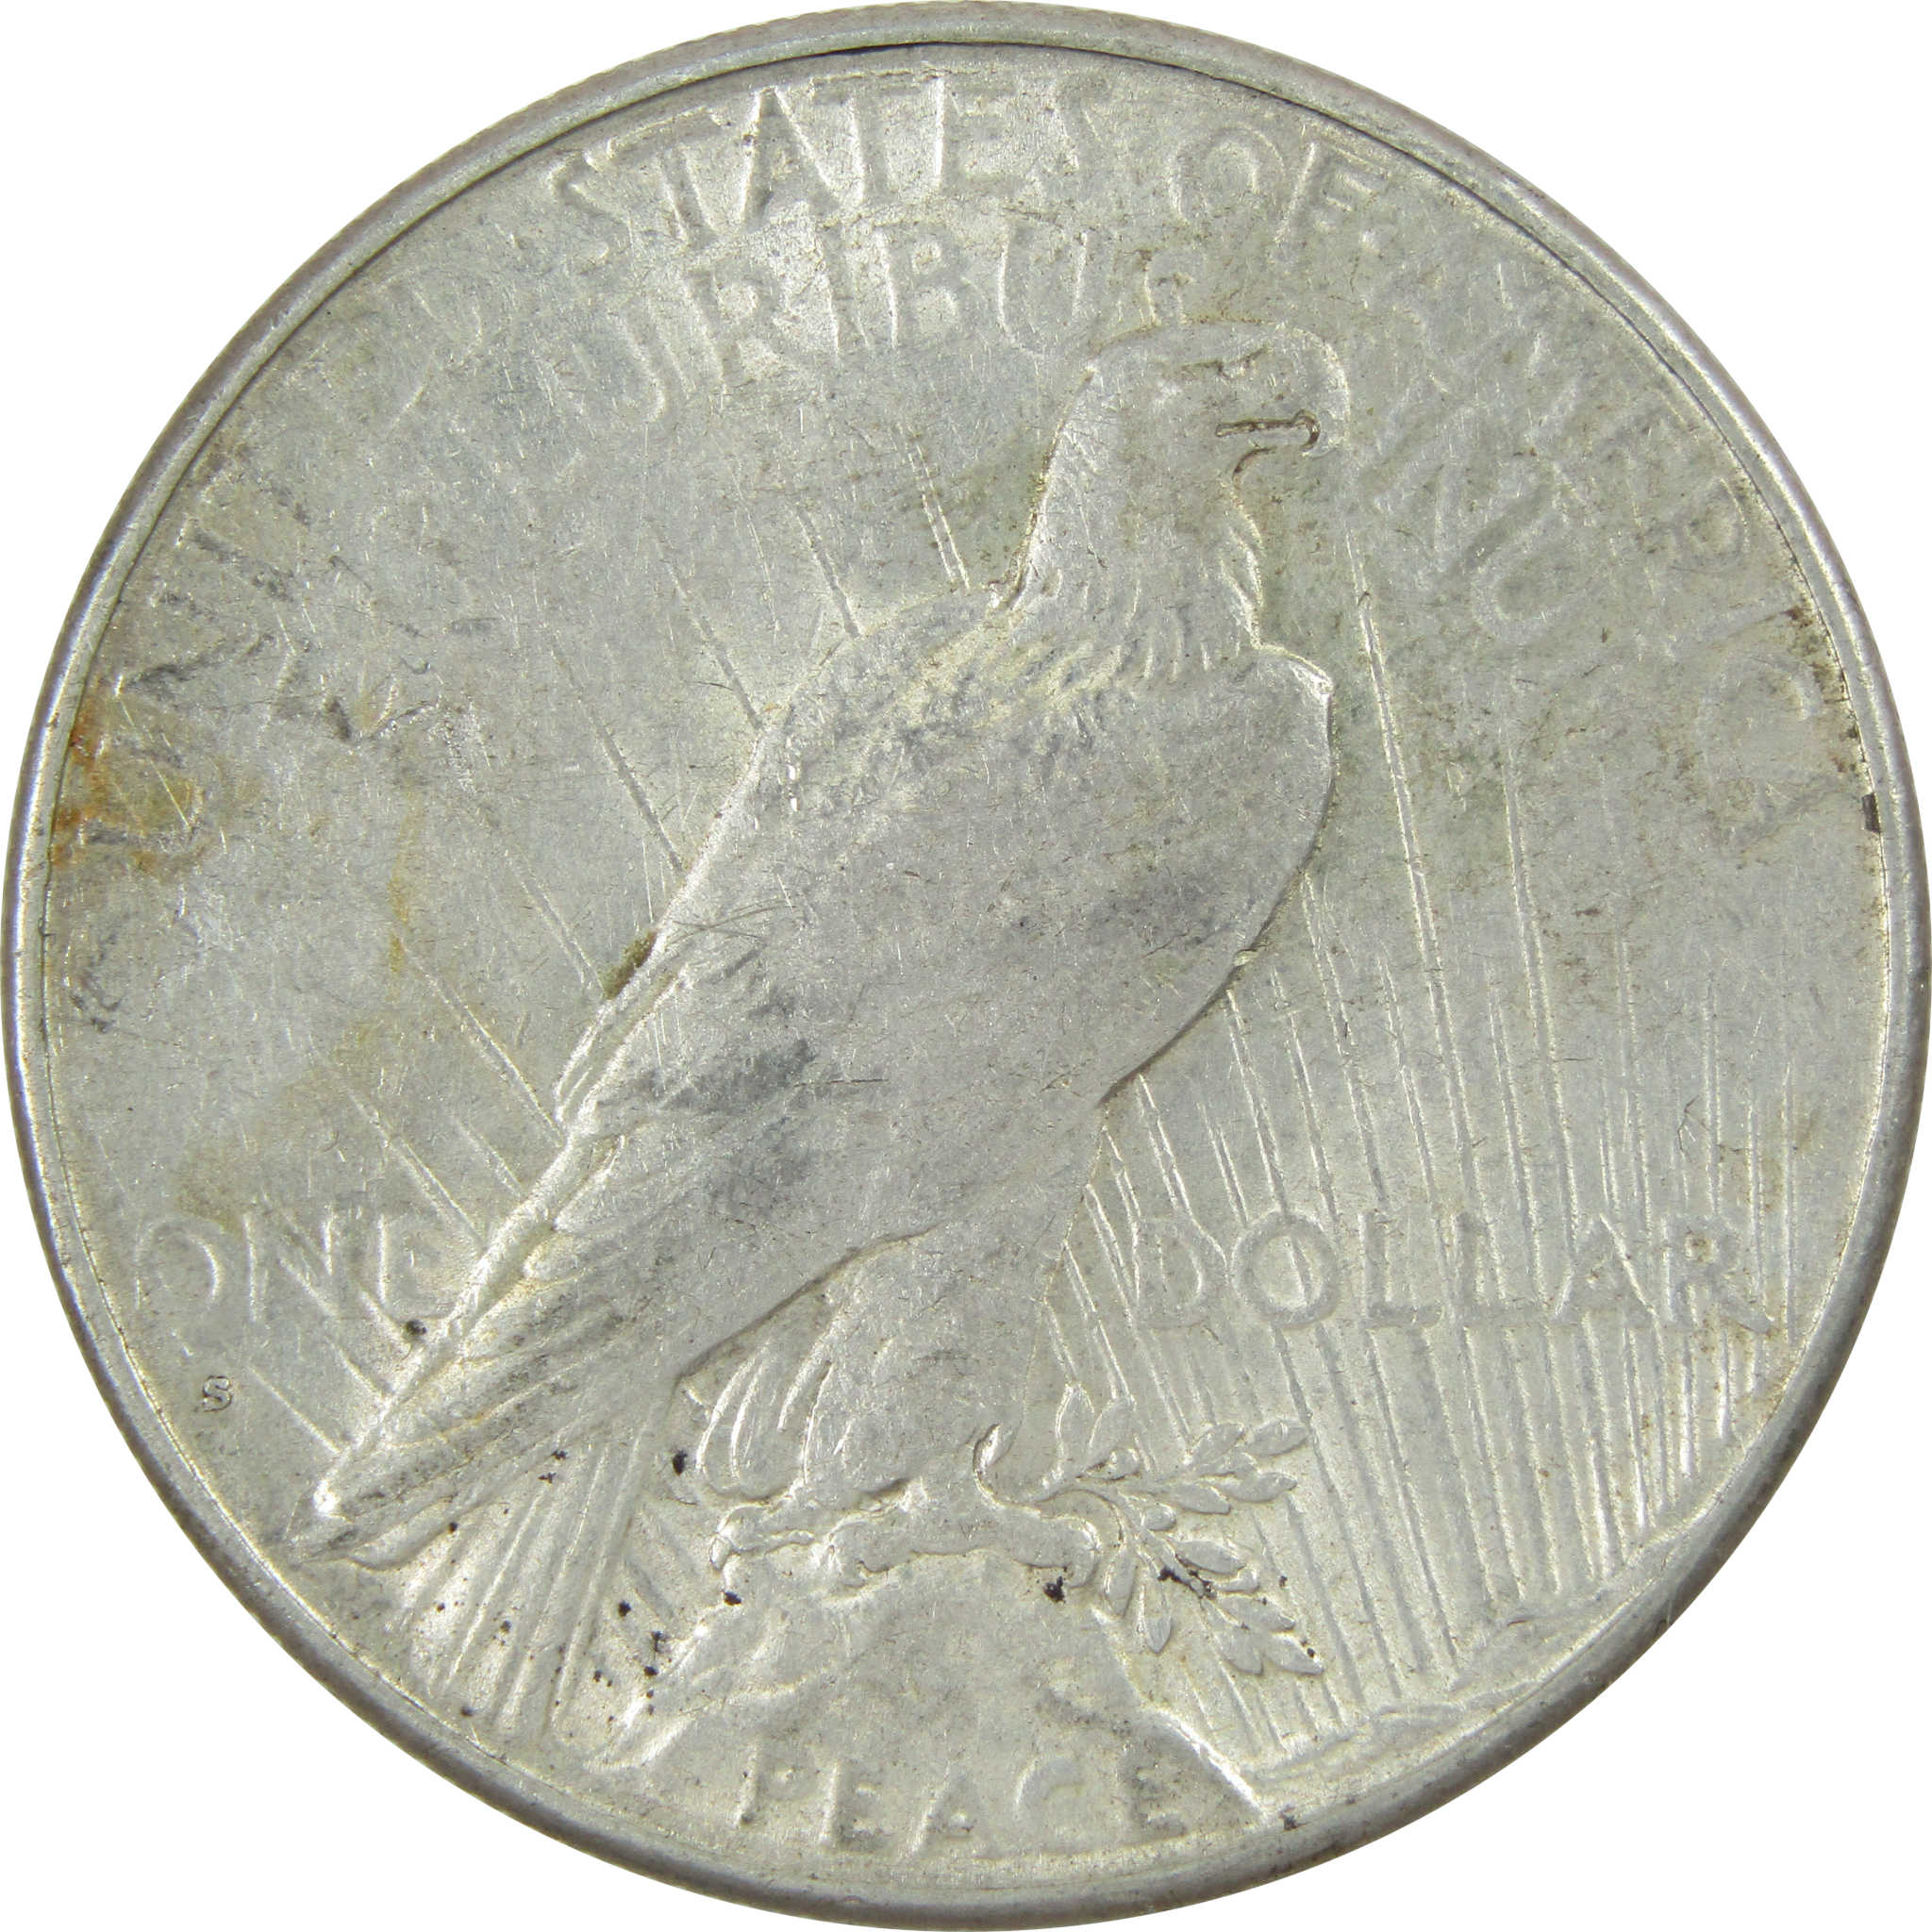 1928 S Peace Dollar AU About Uncirculated Silver $1 Coin SKU:I13690